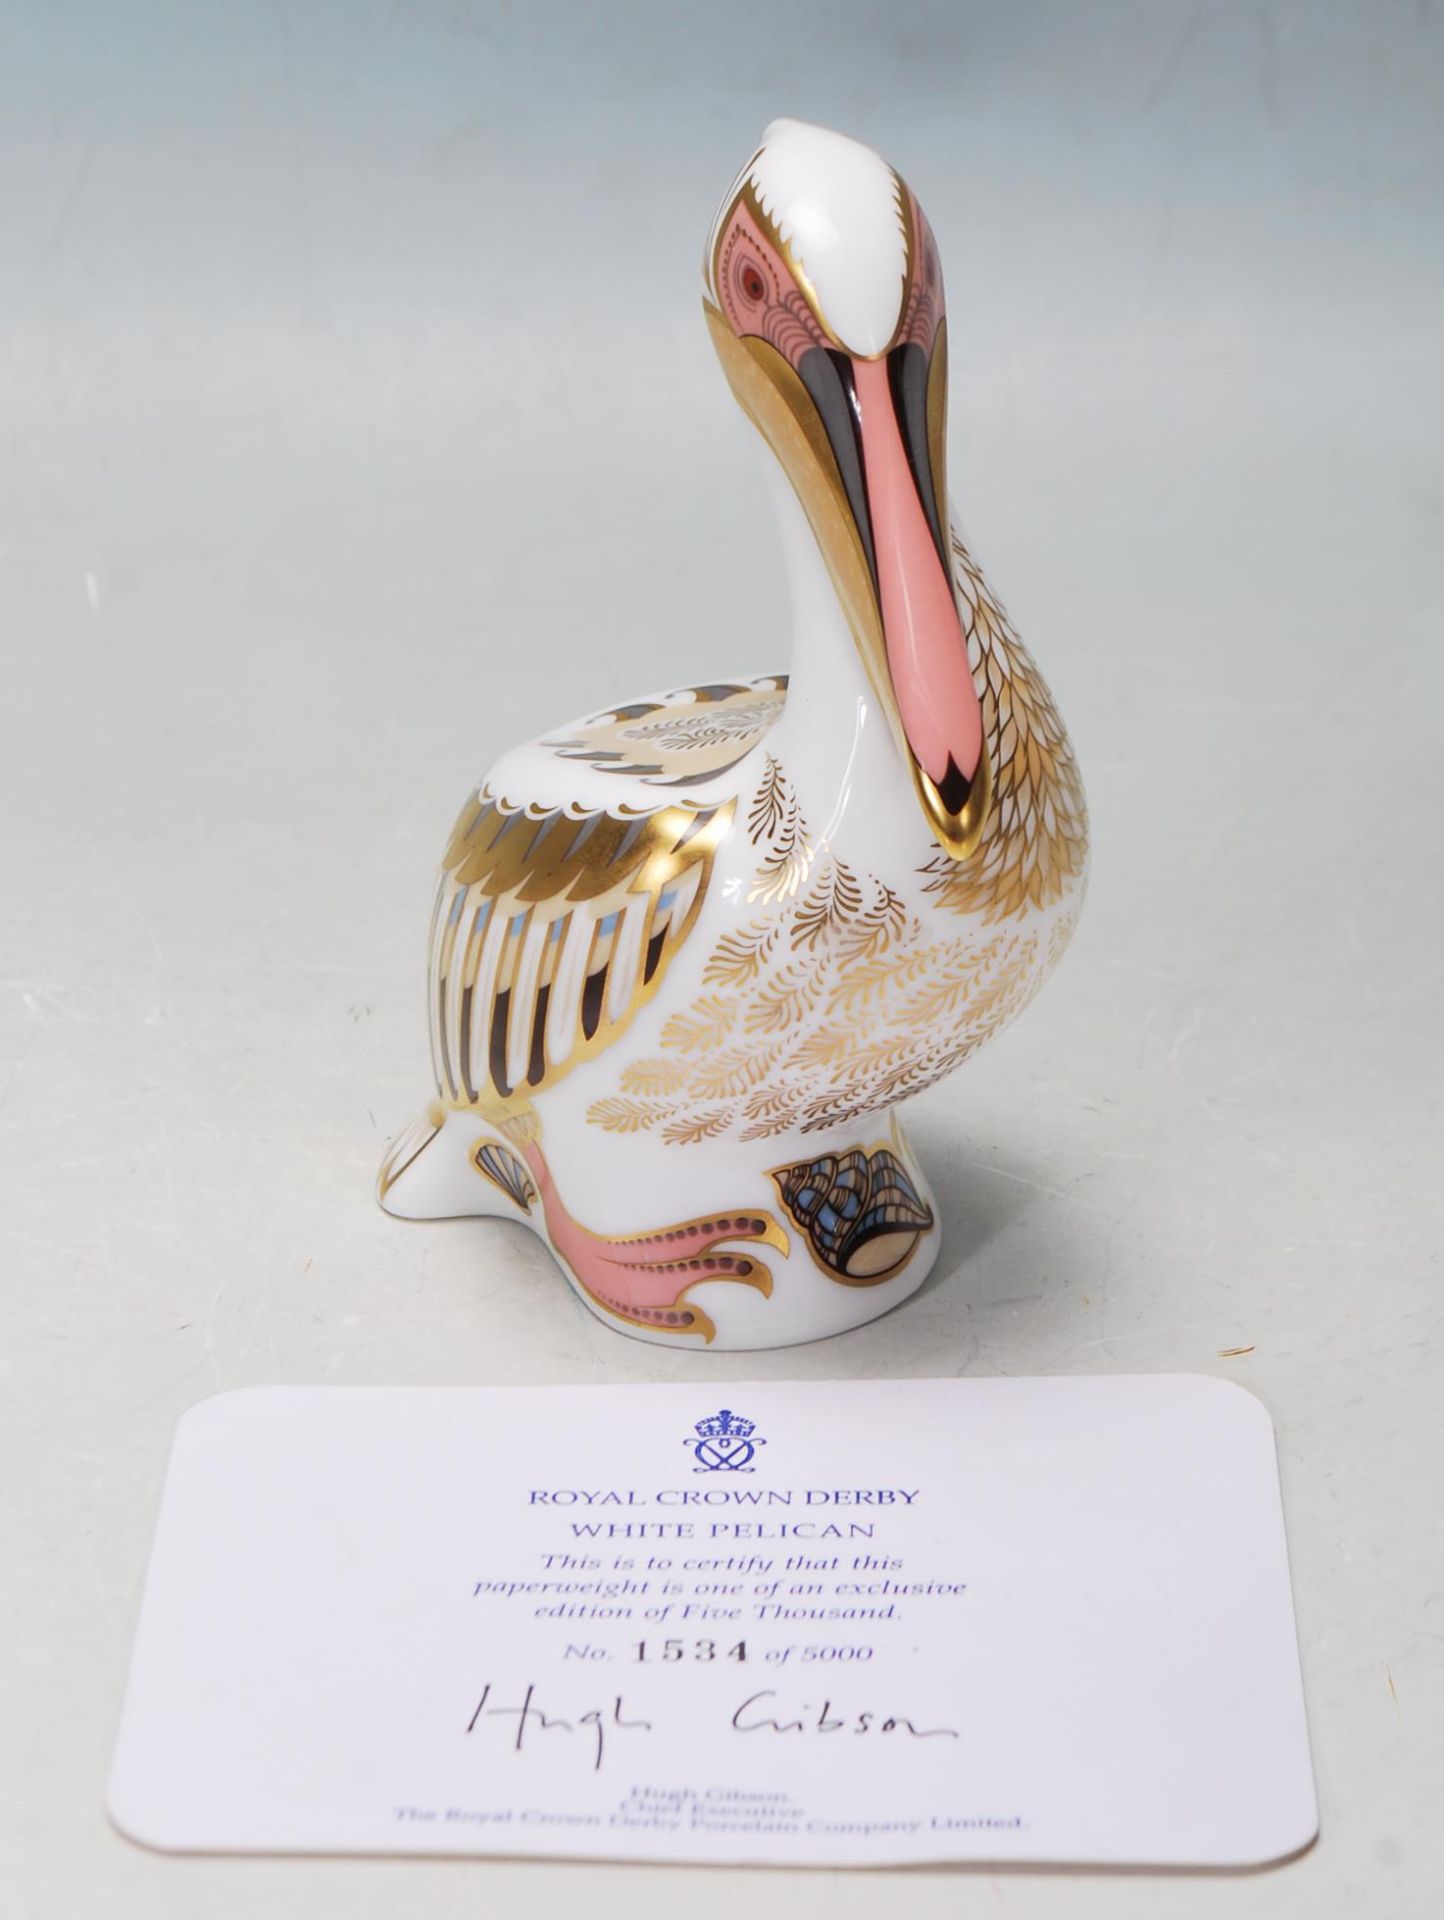 ROYAL CROWN DERBY WHITE PELICAN PAPERWEIGHT WITH GOLD STOPPER